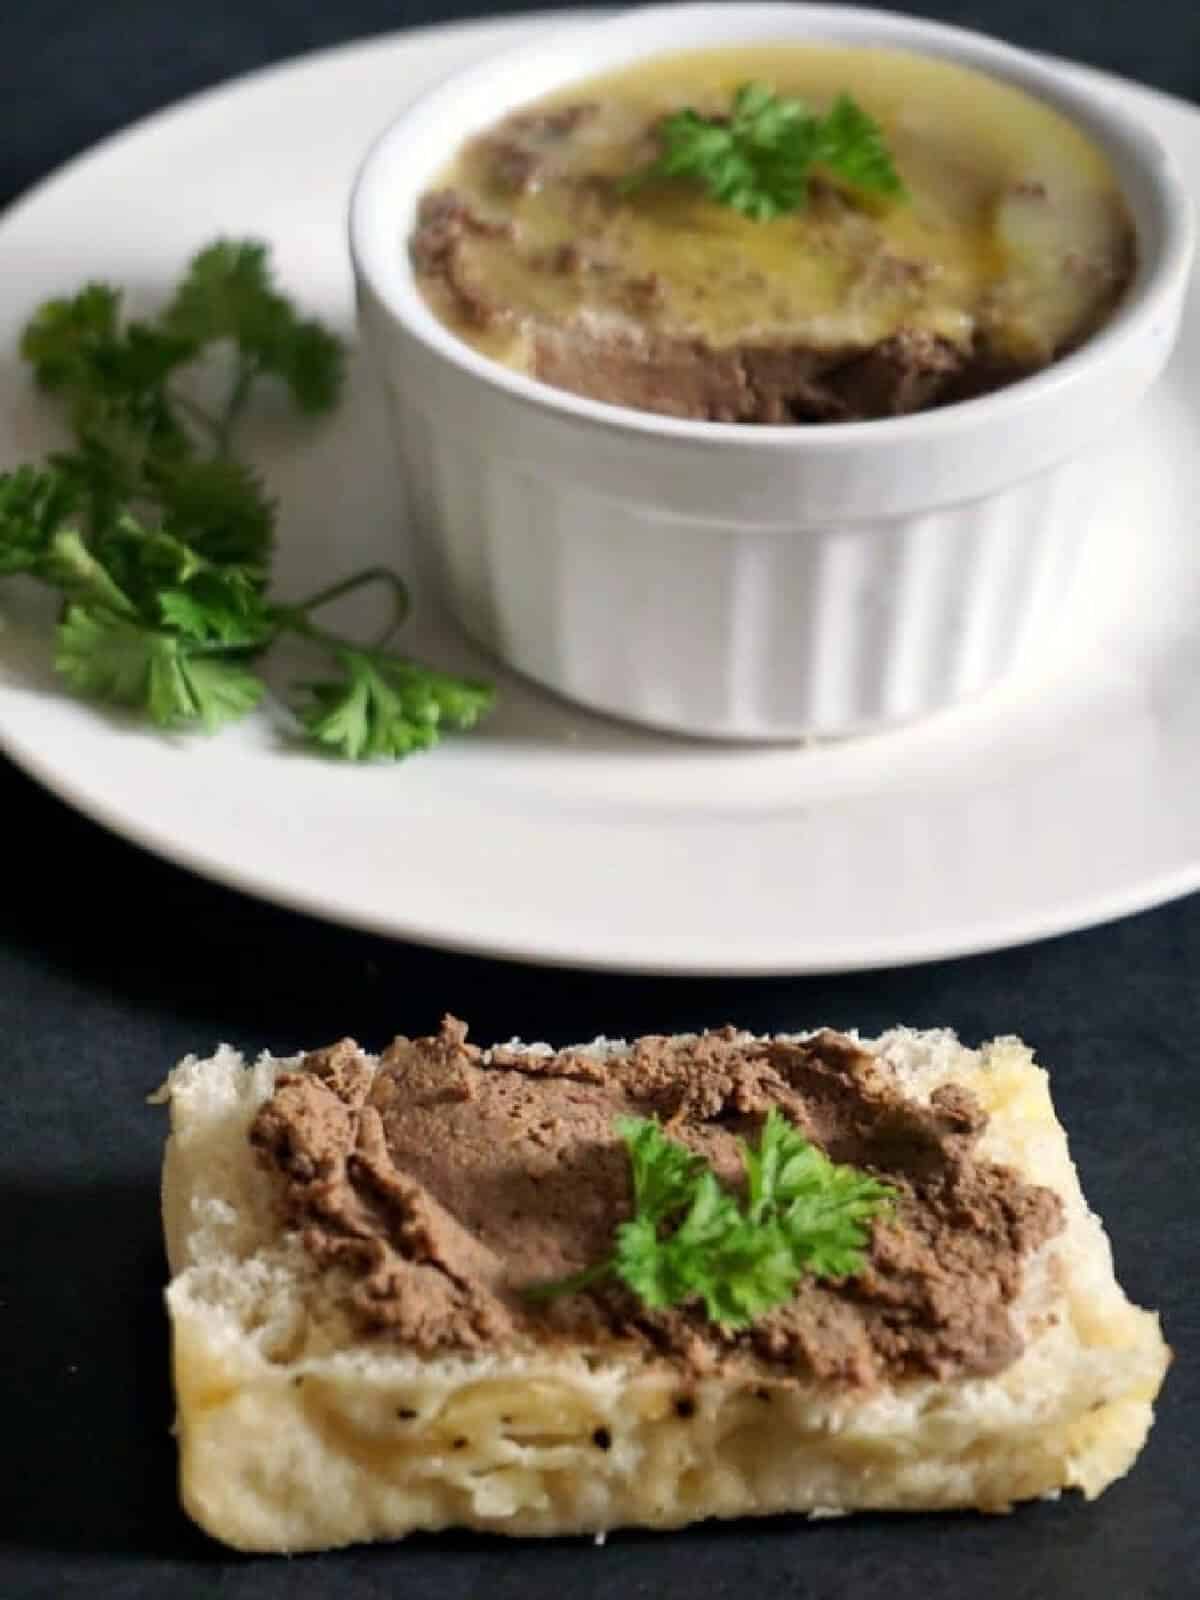 A slice of bread with liver pate and a white plate with a ramekin with more pate.